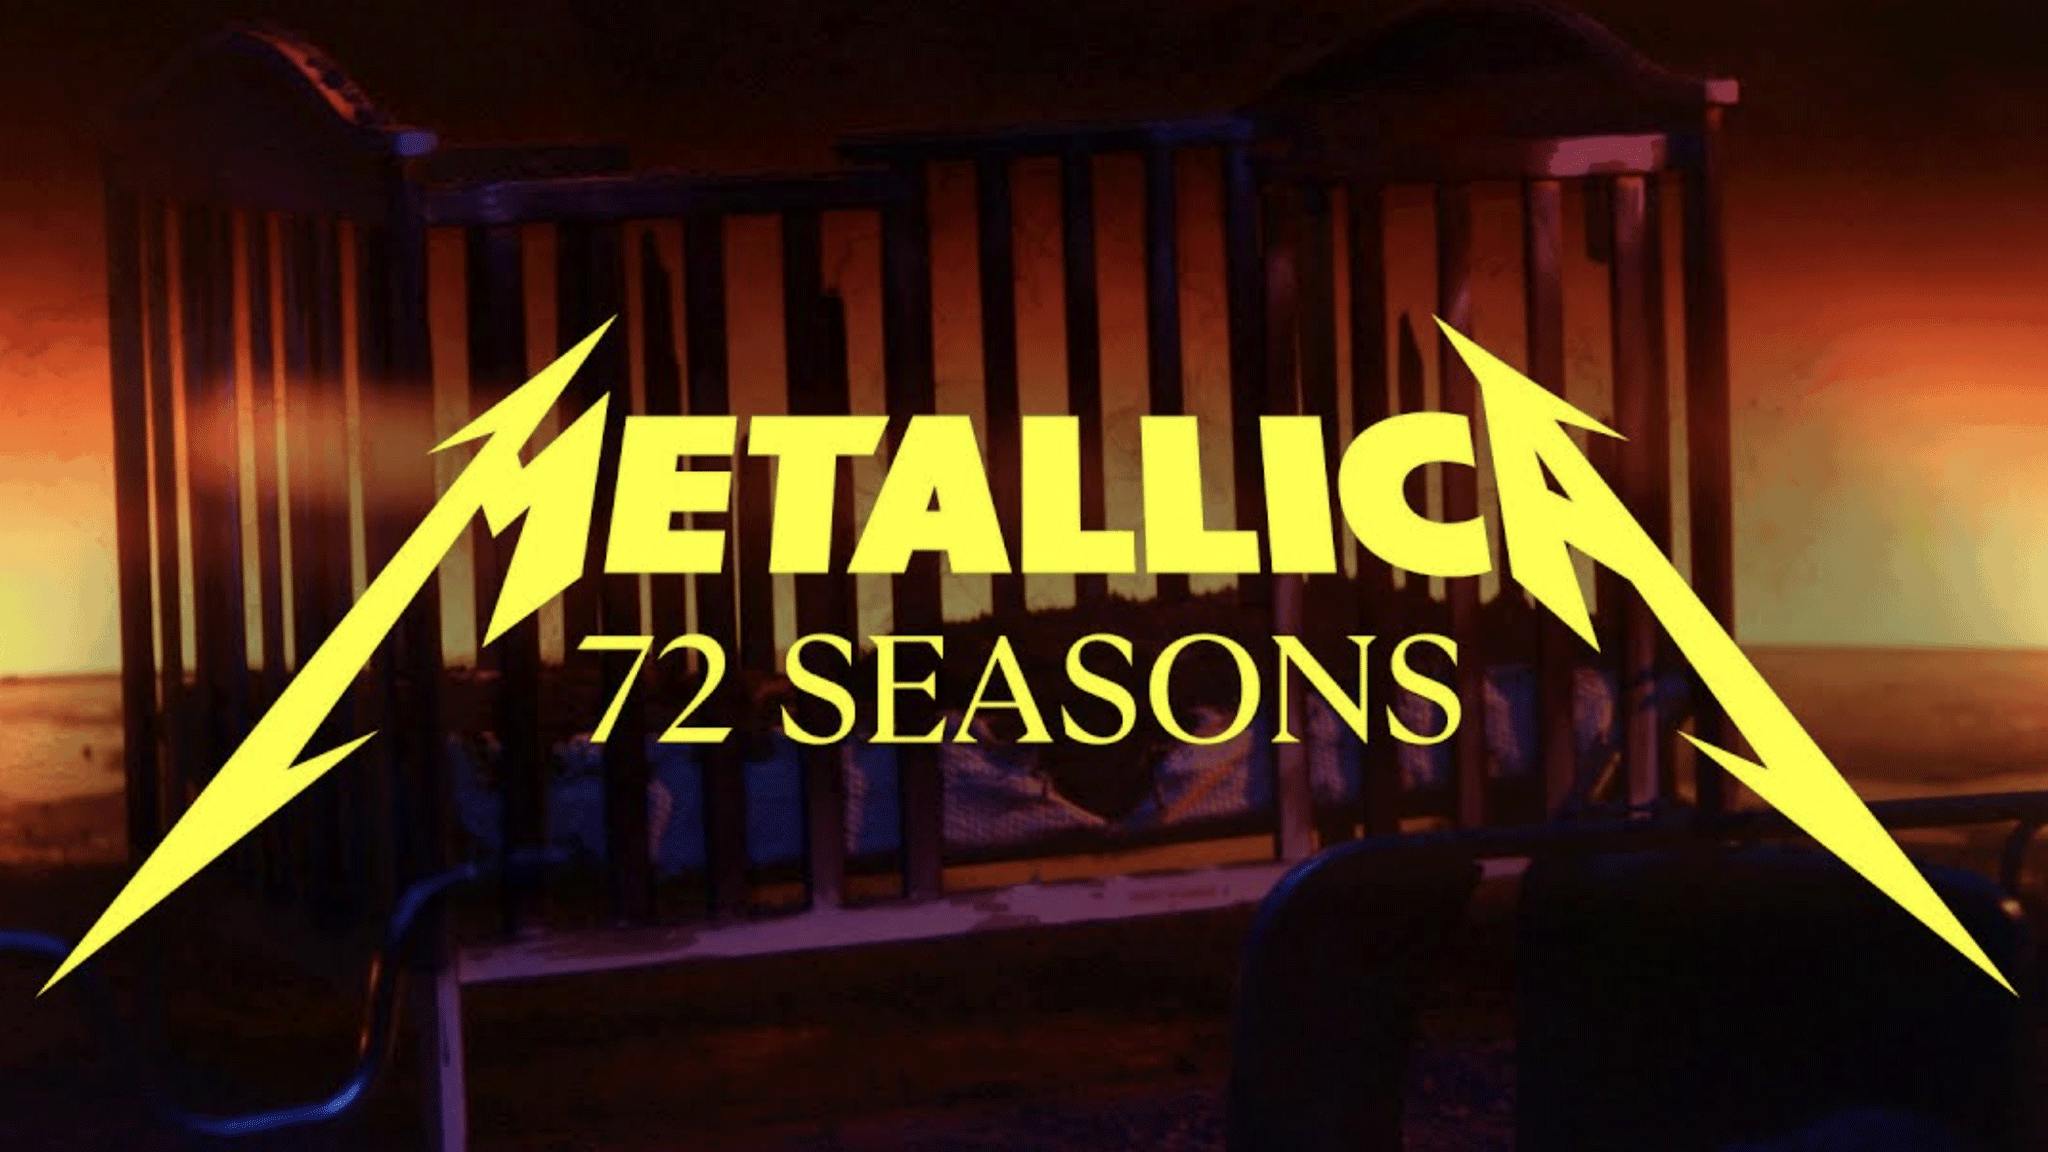 Metallica have just released 72 Seasons’ awesome title-track